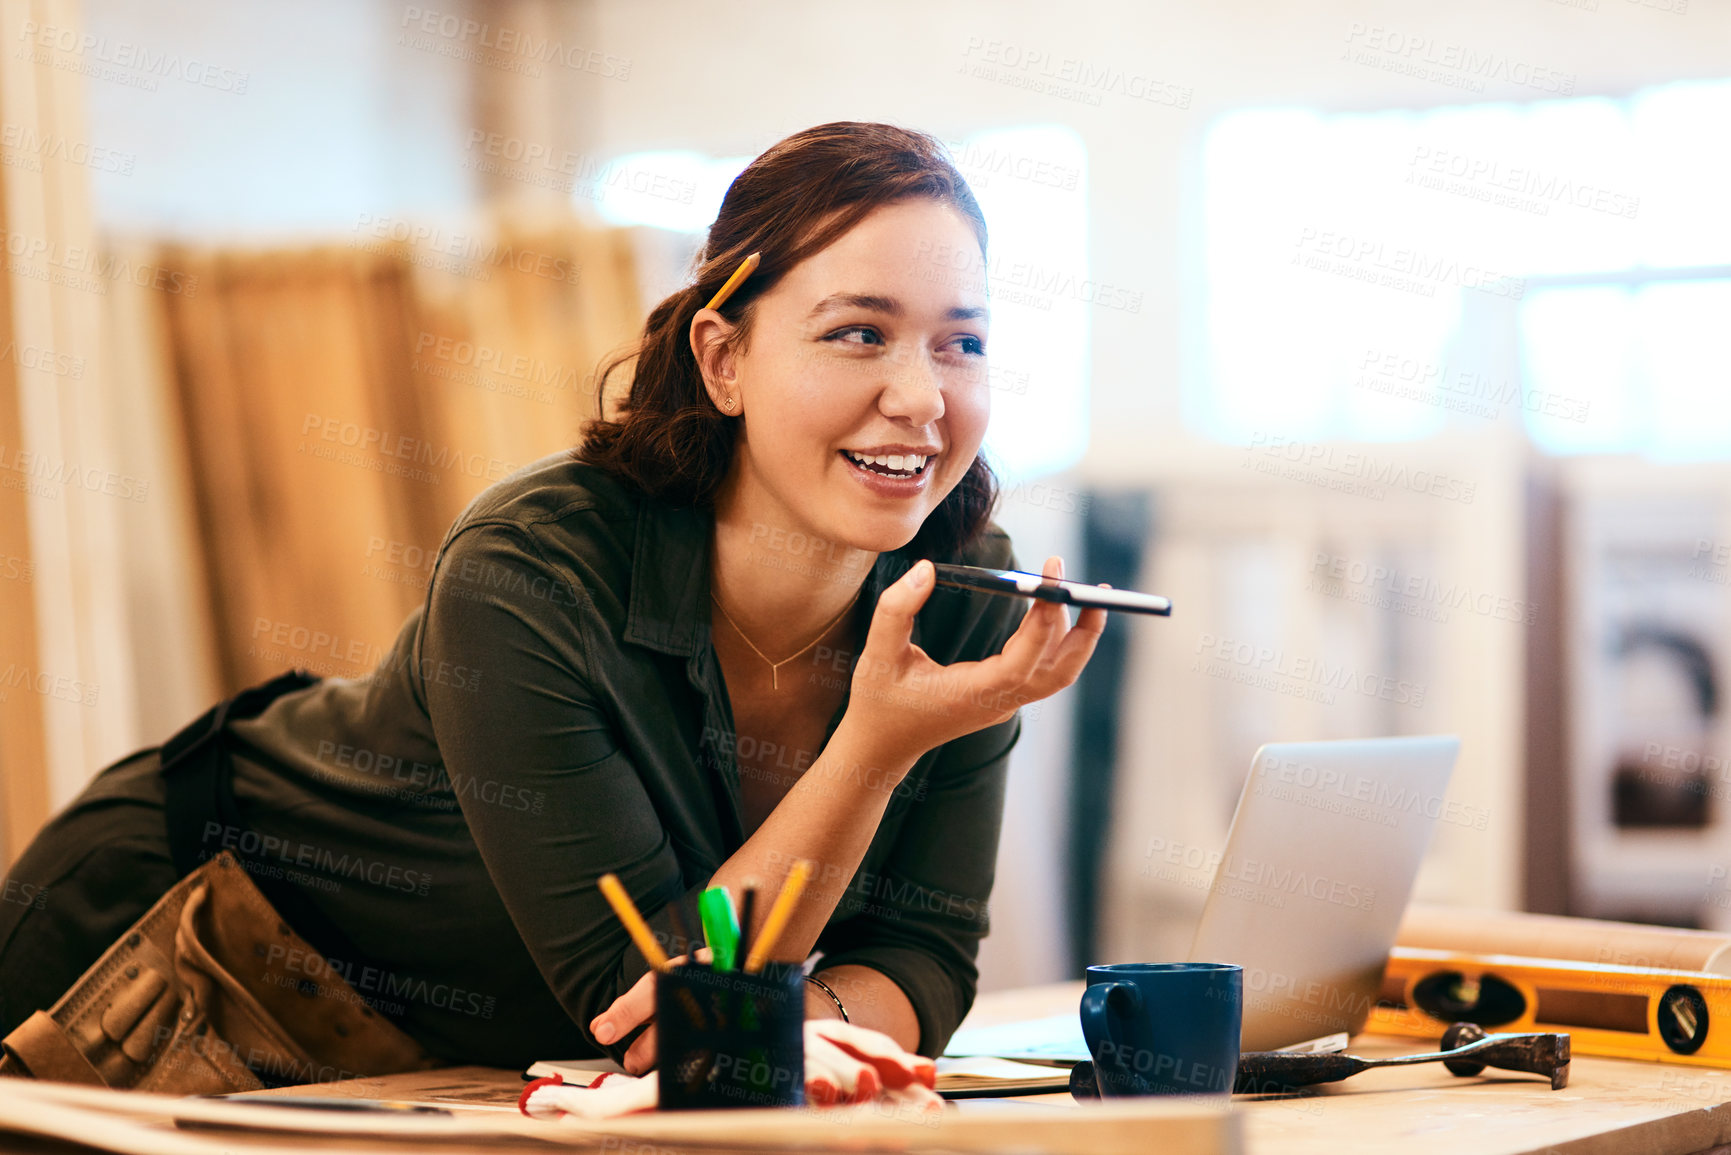 Buy stock photo Cropped shot of a female carpenter using her cellphone while leaning over her desk